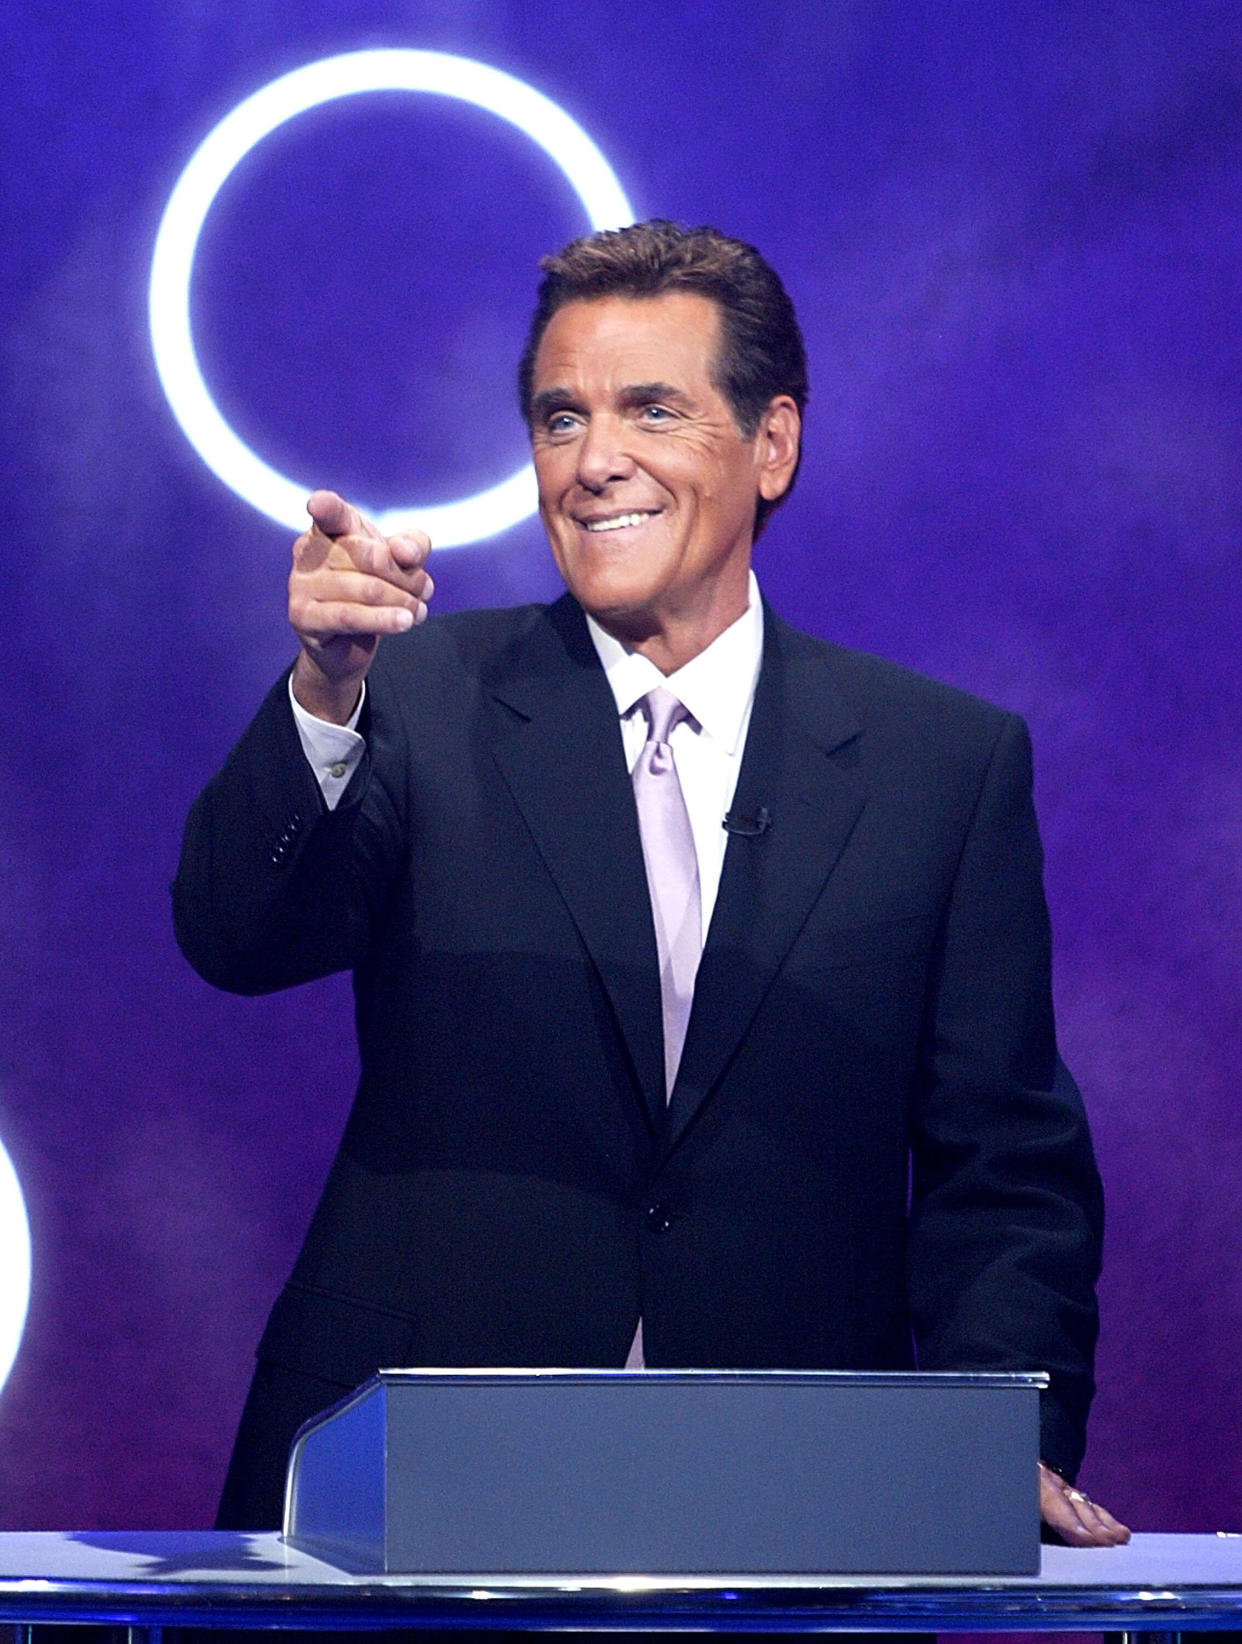 LOS ANGELES, CA - OCTOBER 17:  Host Chuck Woolery talks to a Playboy Playmate who were contestants on the gameshow "Lingo" October 17, 2003 in Los Angeles, California. "Lingo" is the highest original program on the Game Show Network.  (Photo by Carlo Allegri/Getty Images for Game Show Network)